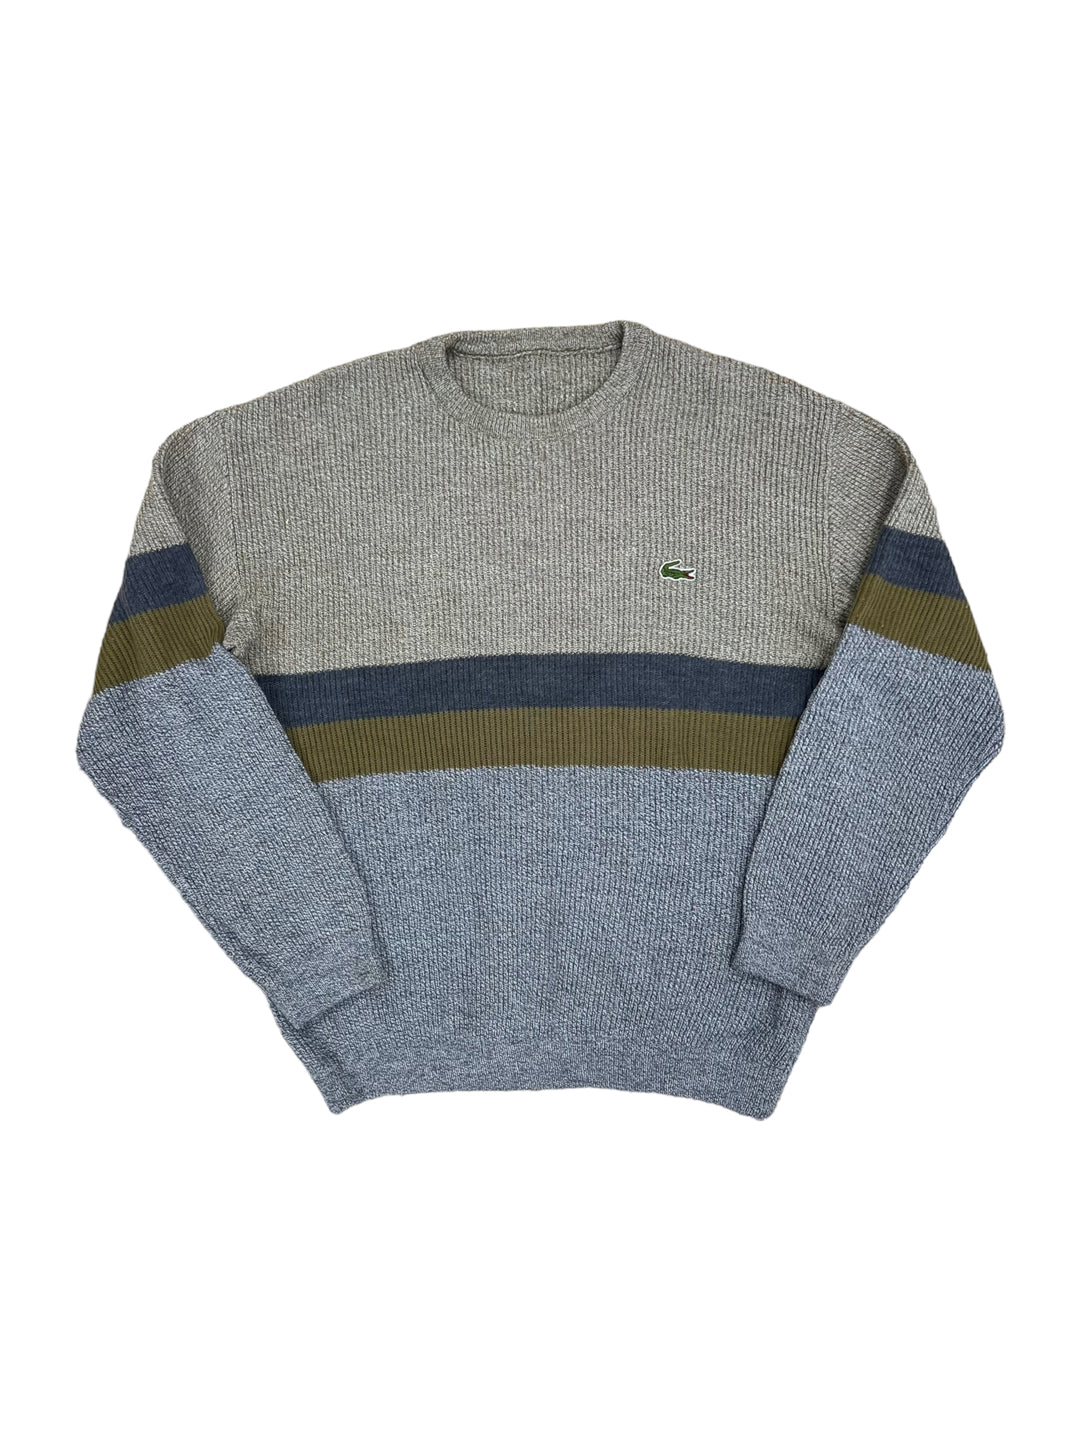 Lacoste Vintage Sweater Men’s Extra Large